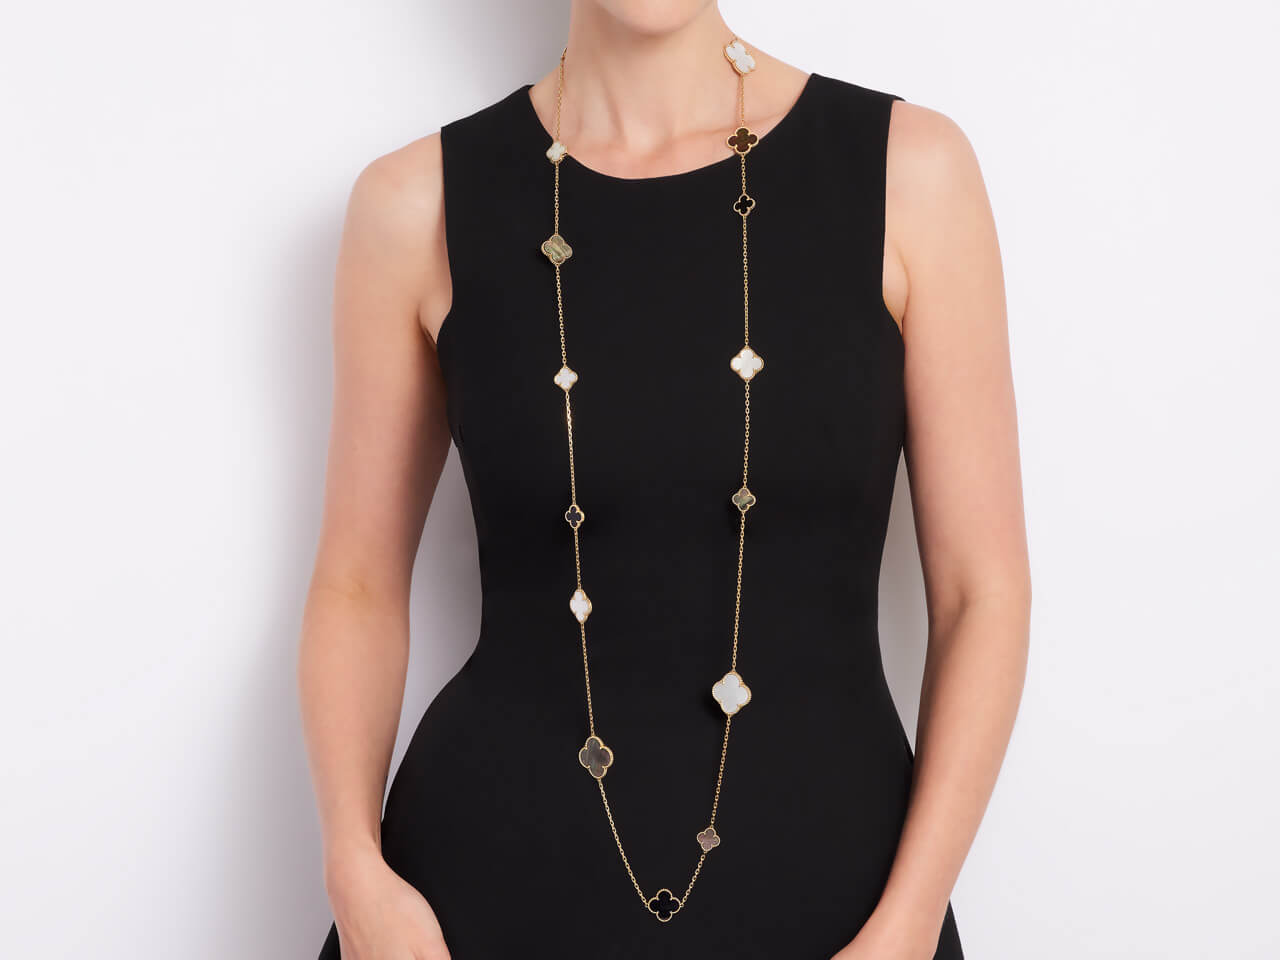 Van Cleef & Arpels 'Magic Alhambra' 16 Motif Mother-of-Pearl and Onyx Necklace in 18K Gold